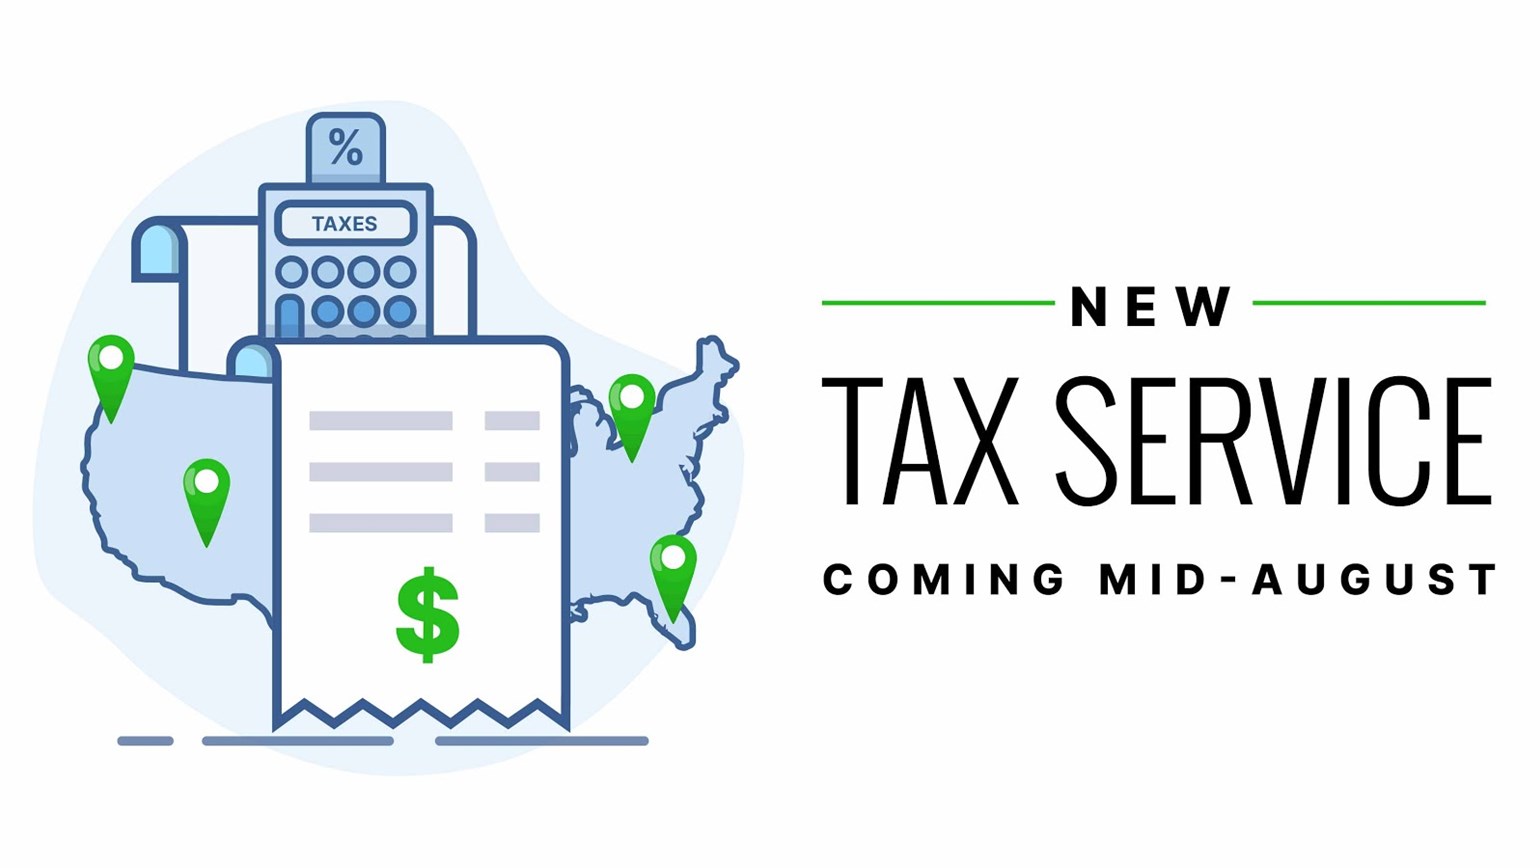 New Tax Service Coming Mid-August